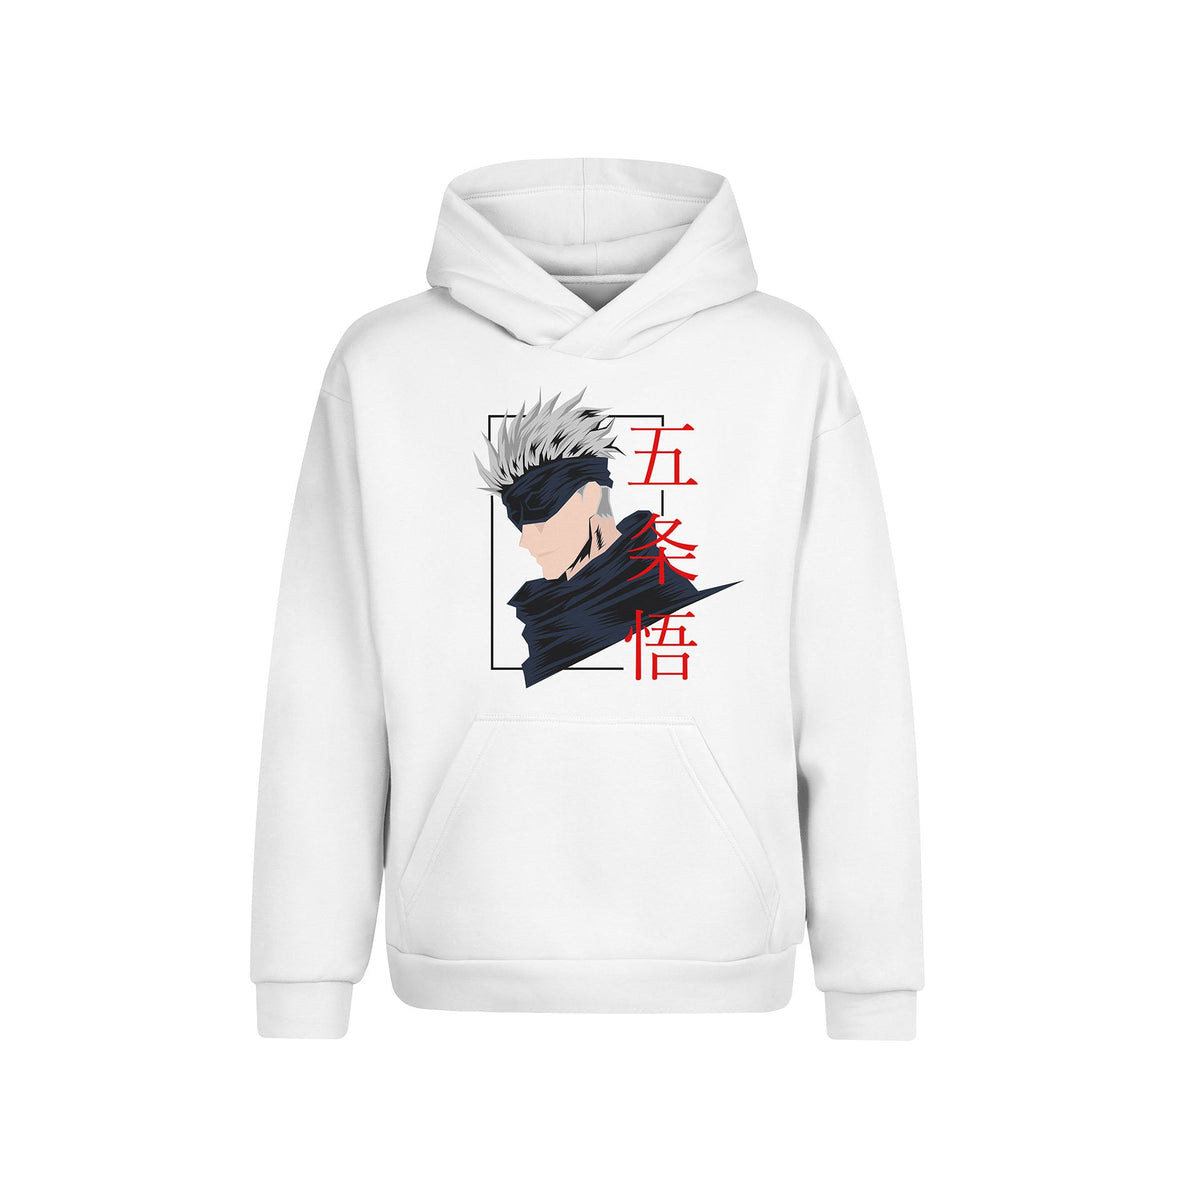 Buy Amazing Anime Hoodies & Anime Jackets Online – Fans Army